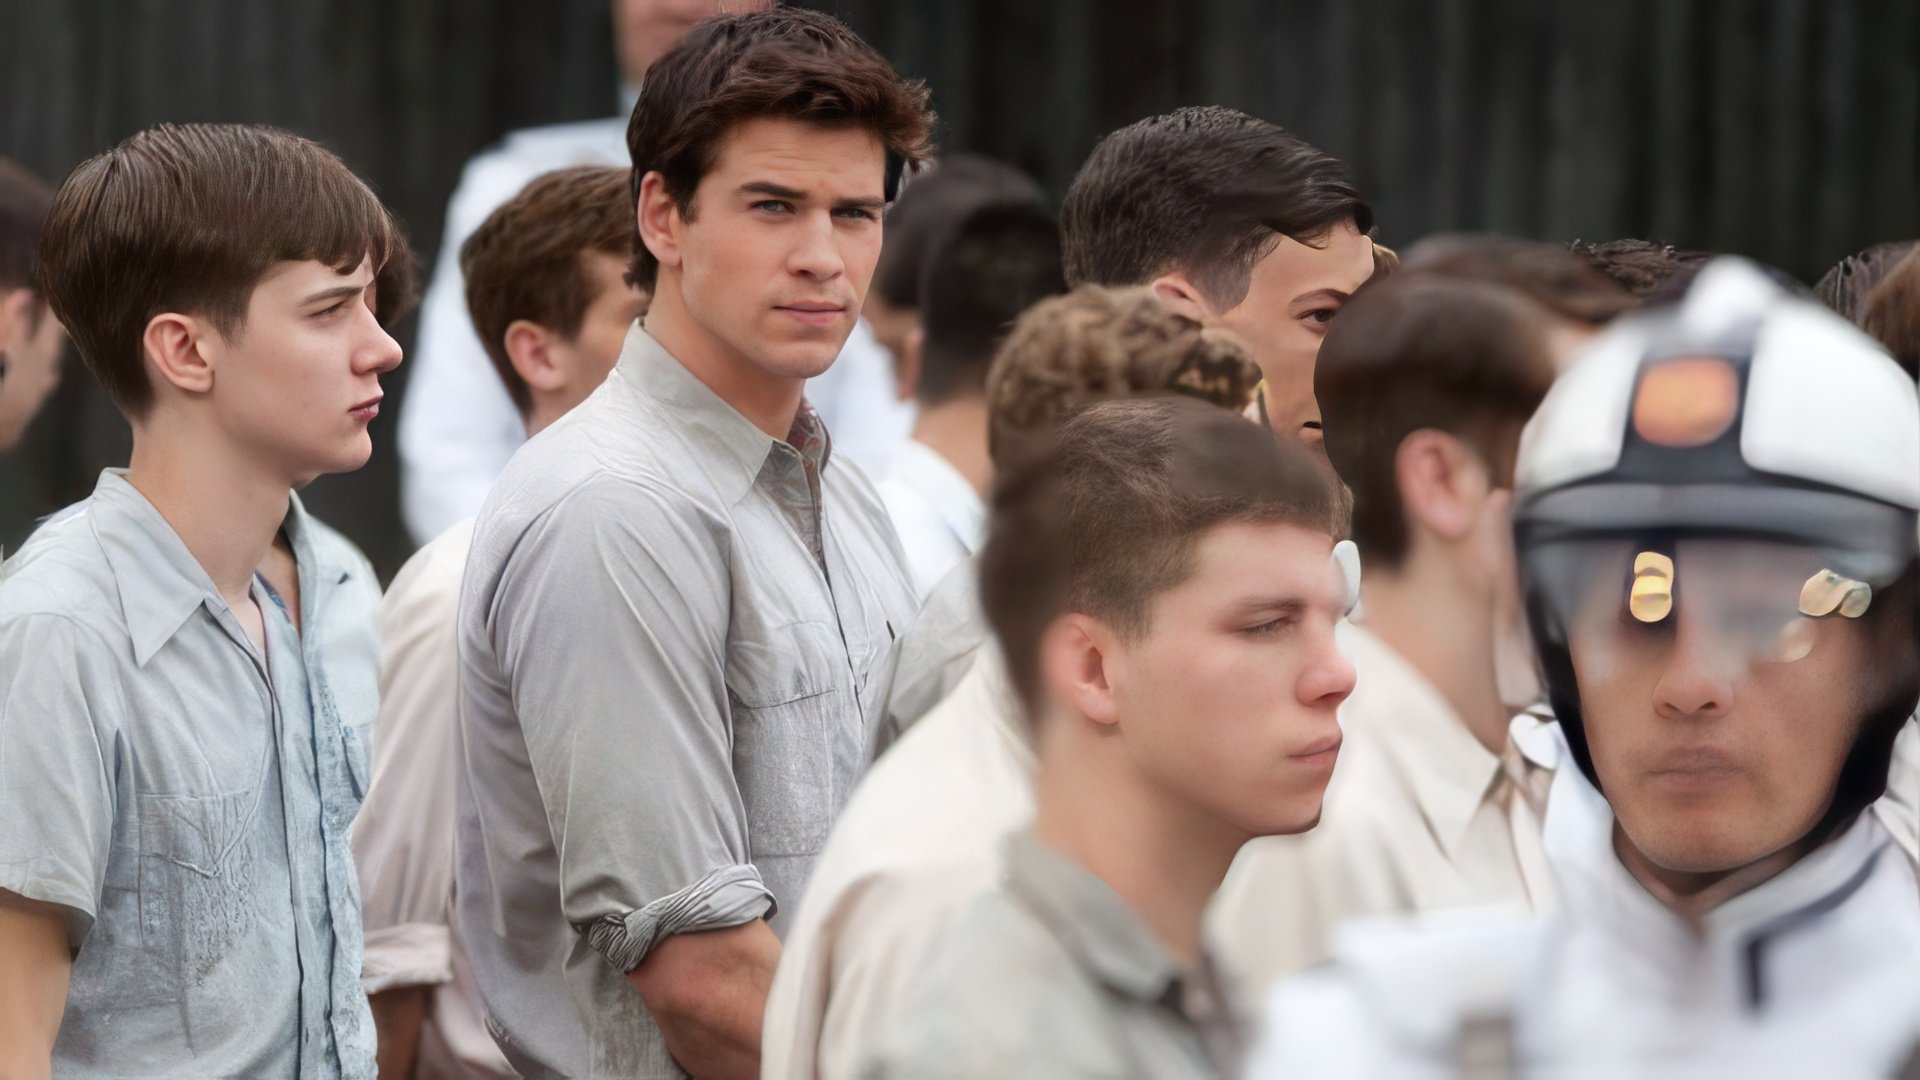 Gale Hawthorne from 'The Hunger Games' – Liam Hemsworth